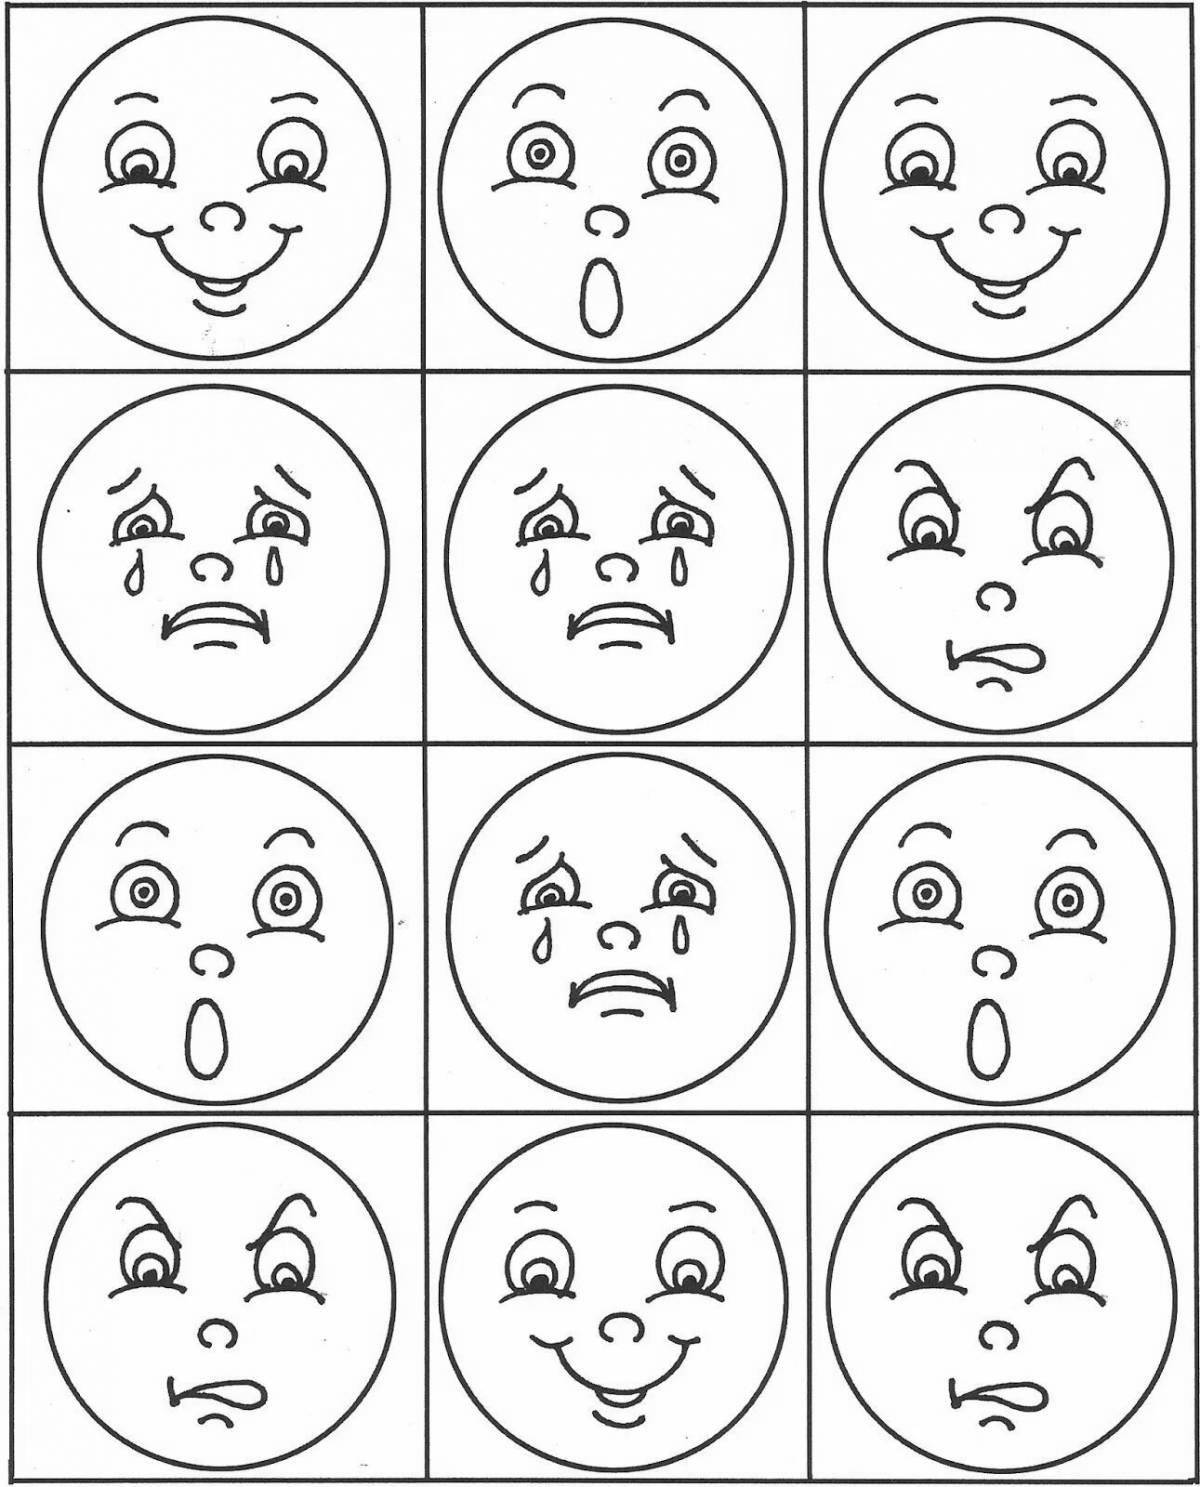 Surprised facial expressions coloring pages for kids